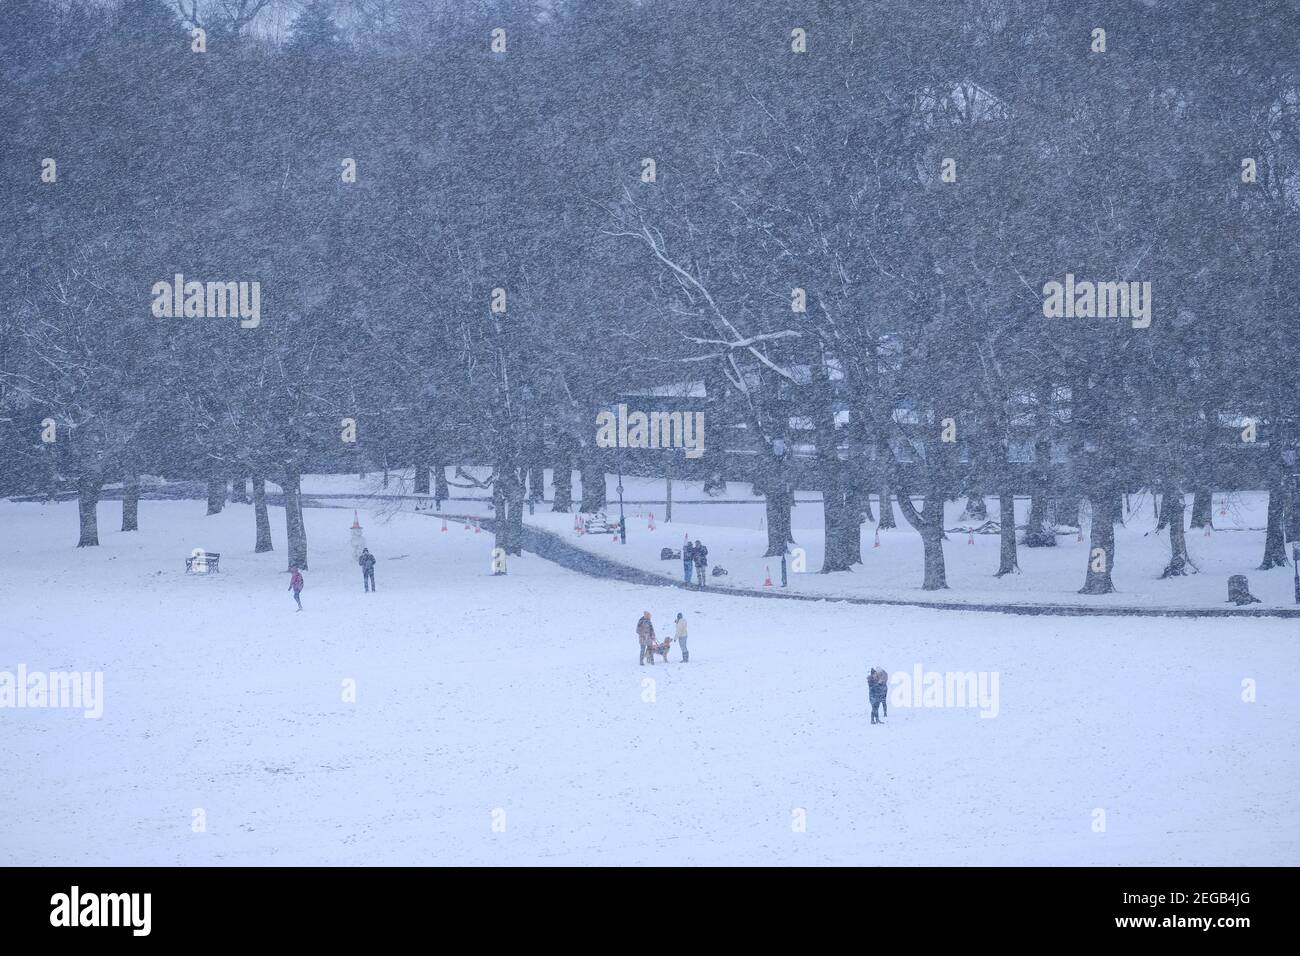 EDINBURGH, UNITED KINGDOM - FEBRUARY 17, 2021: The blizzard, strong wind, walking people in a park Stock Photo